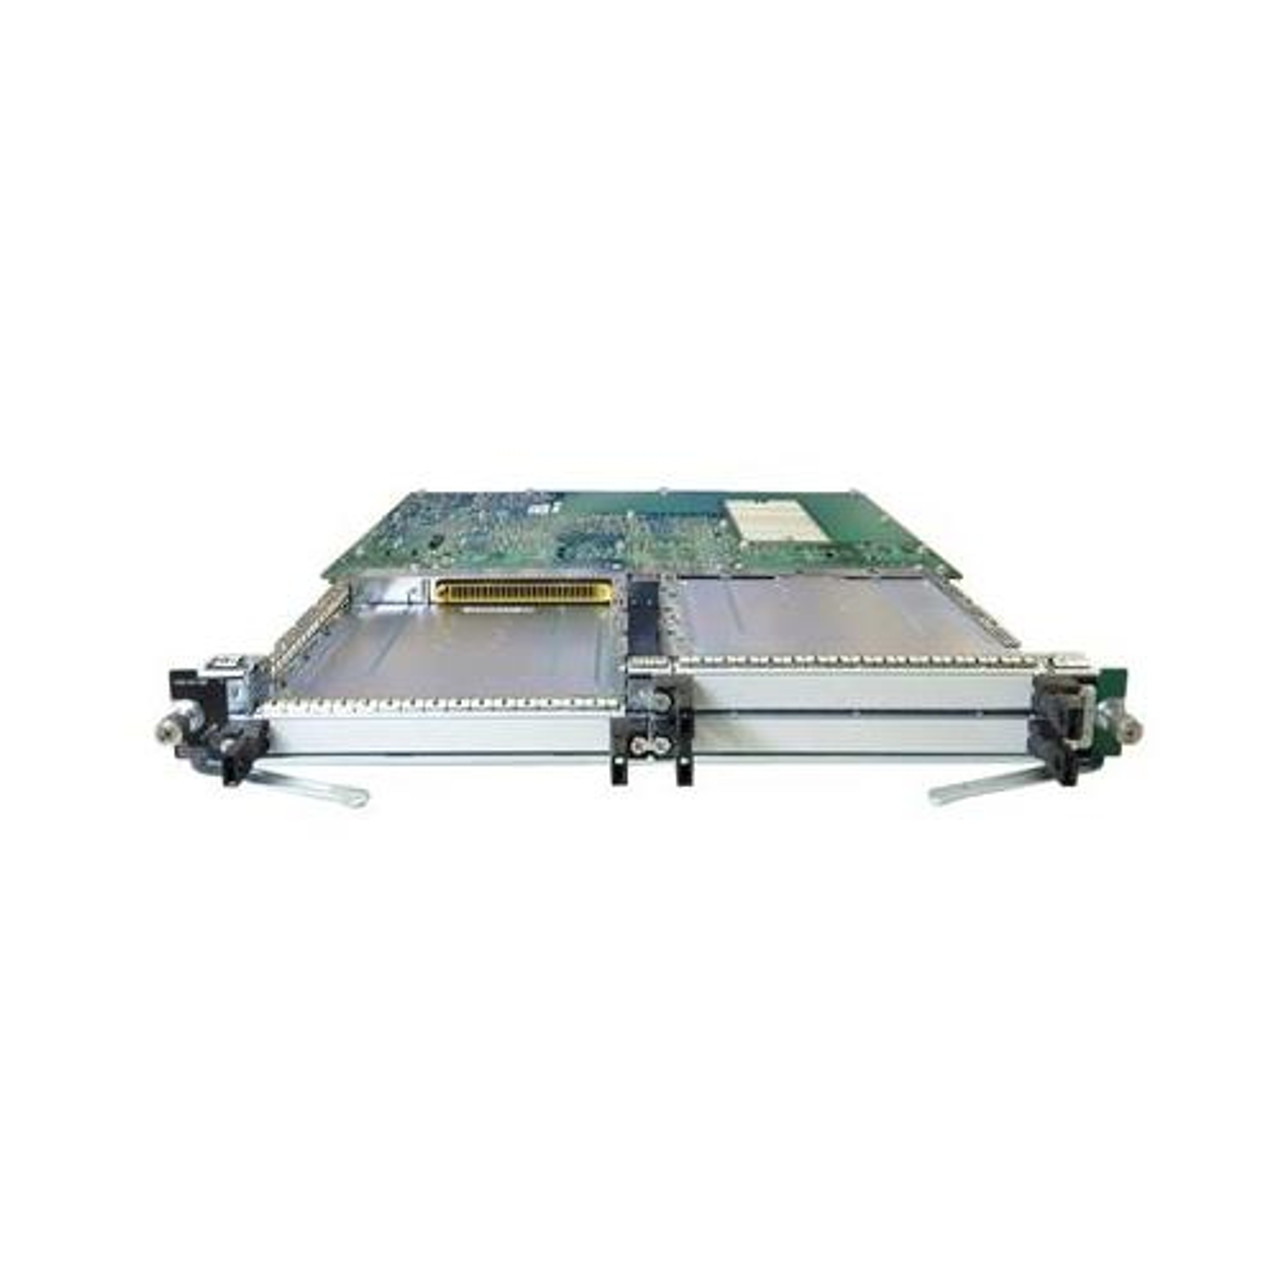 402476600030001 Cisco D9858 Adv Rx Xcdr Asi In 3xasi Mpegoip (Refurbished)